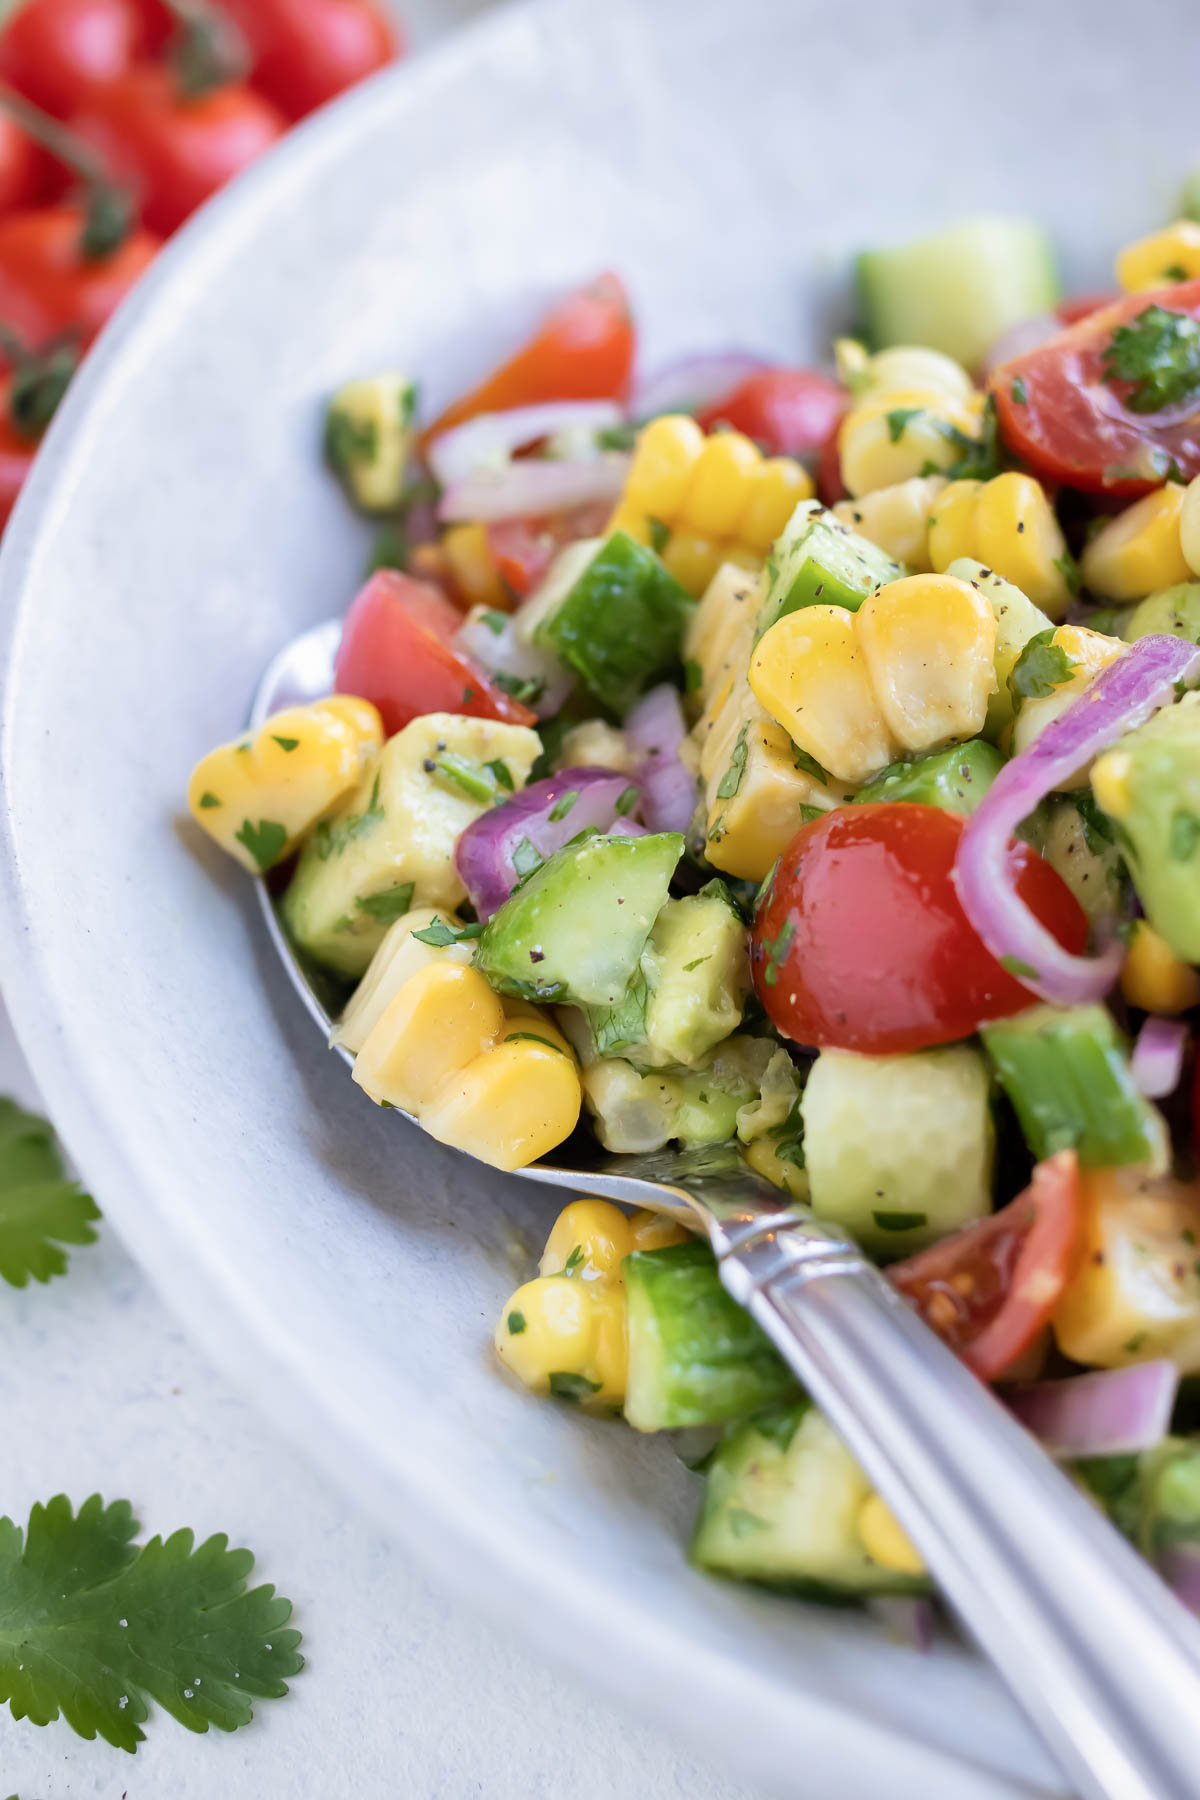 Avocado corn salad is served from a bowl for a light and refreshing side.